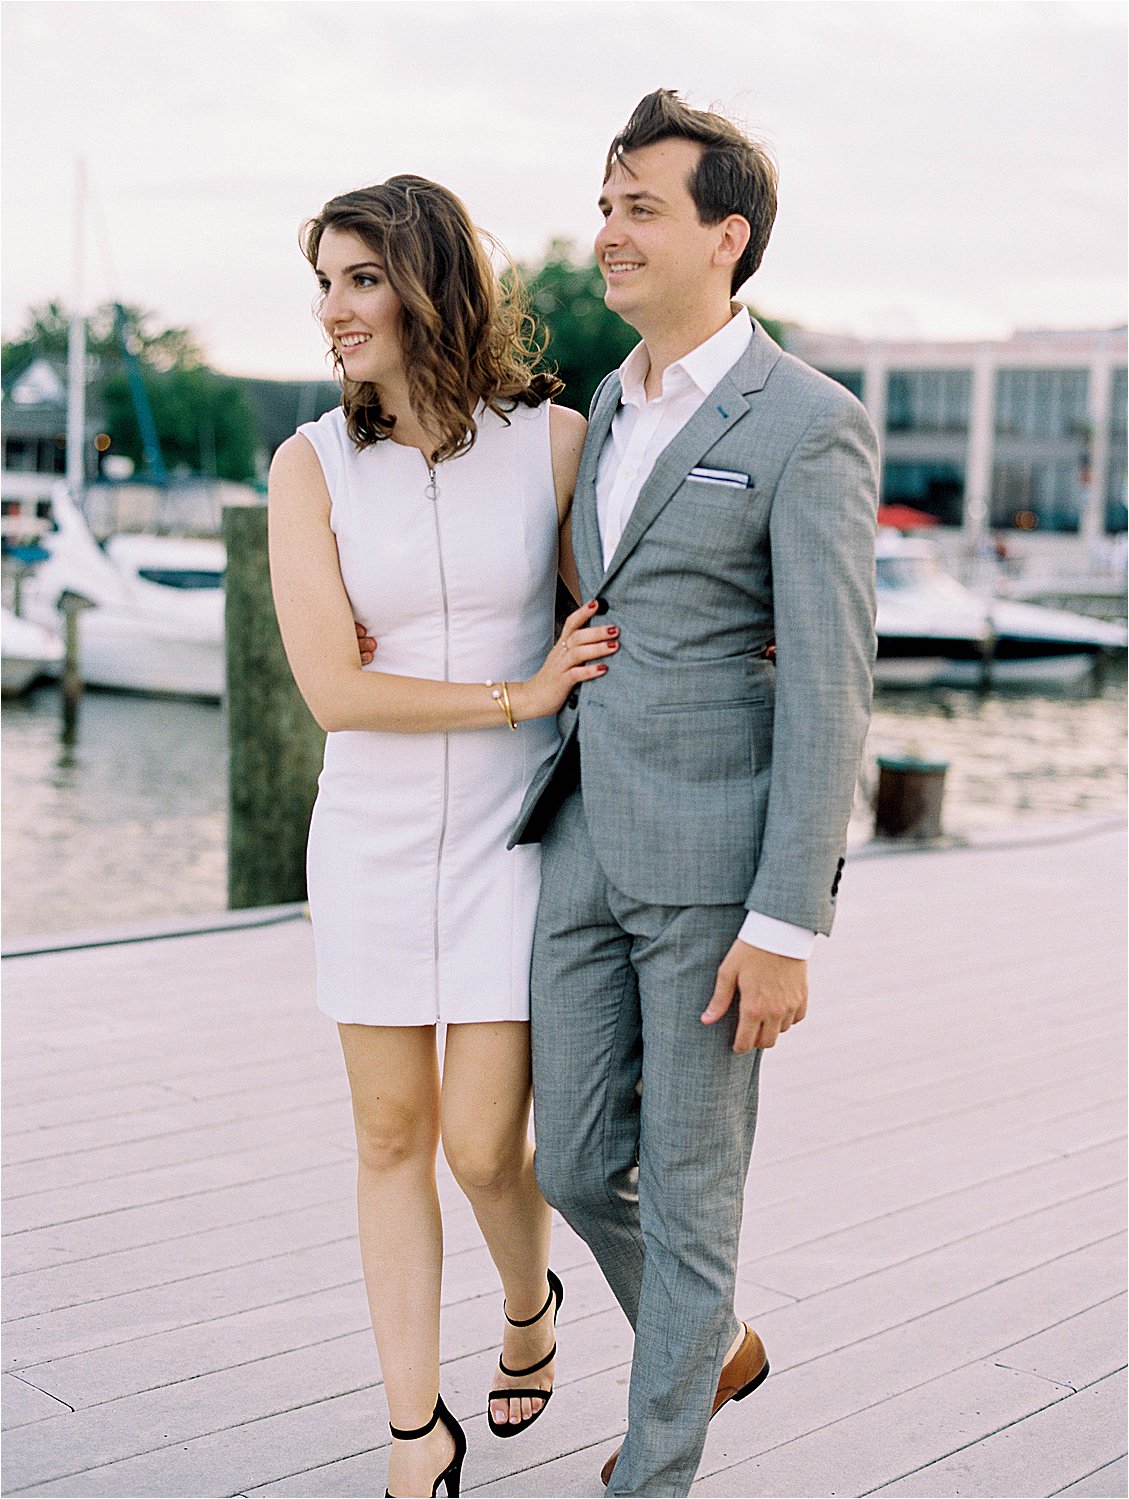 Breezy Modern and Minimal Engagement Session in Old Town with DC Film Wedding Photographer, Renee Hollingshead